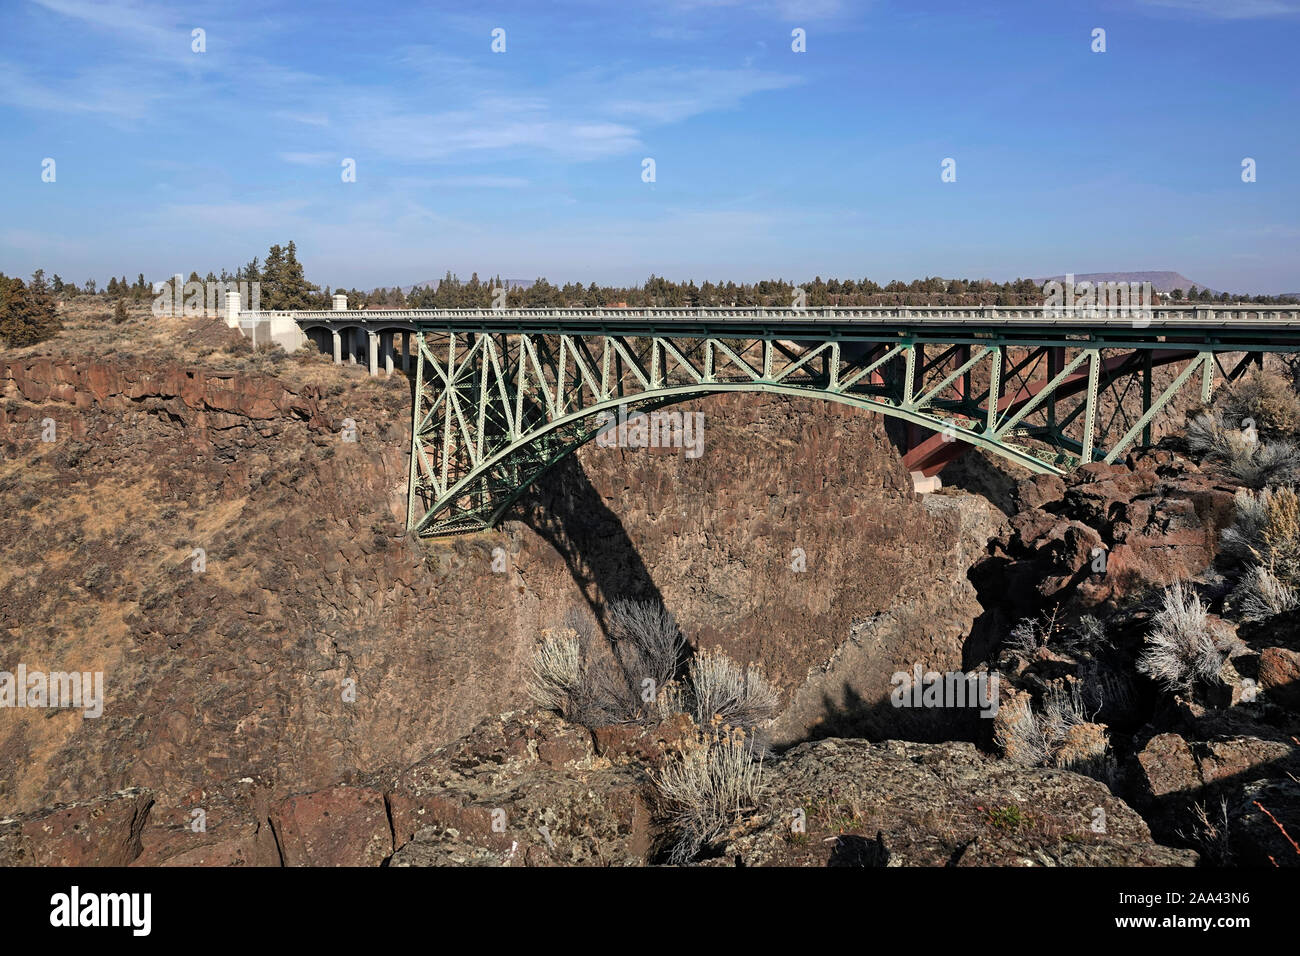 Built in 1926, the Crooked River High Bridge in central Oregon is 464 feet long and is 295 feet above the river. It is one of the highest bridges in t Stock Photo